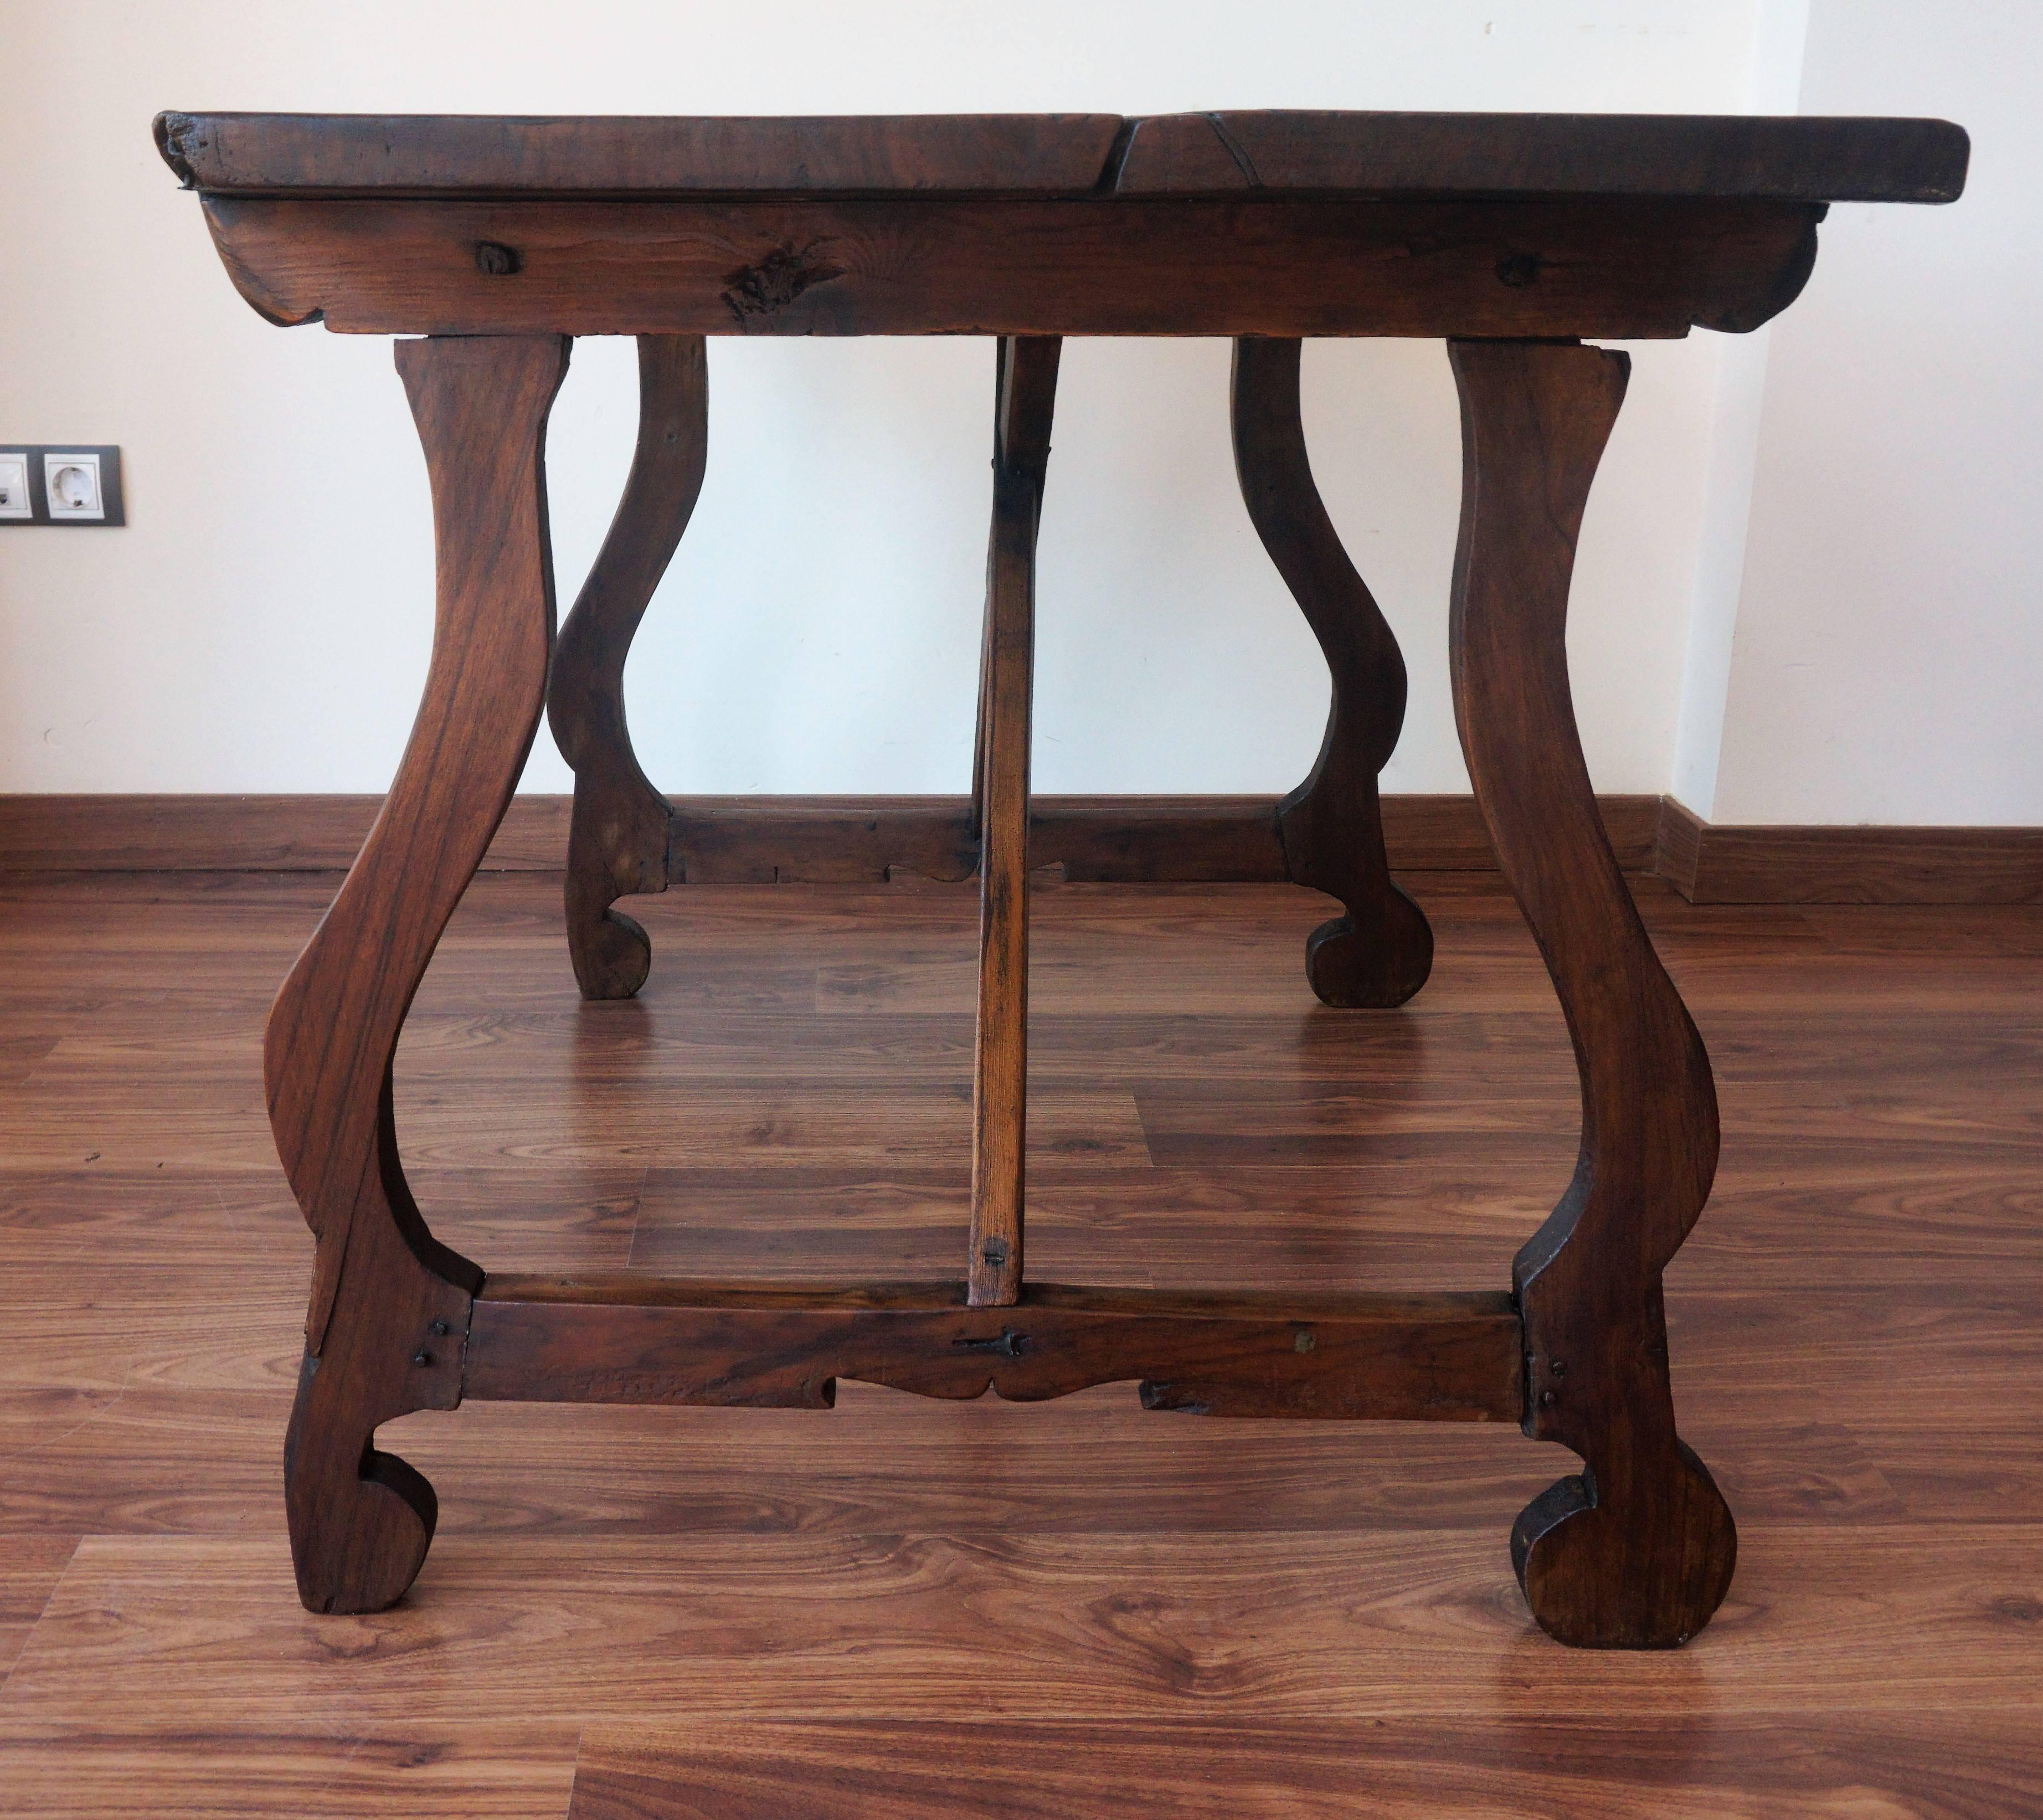 19th Century 18th Century, Spanish Baroque Trestle Refectory Desk Table on Lyre-Shaped Legs